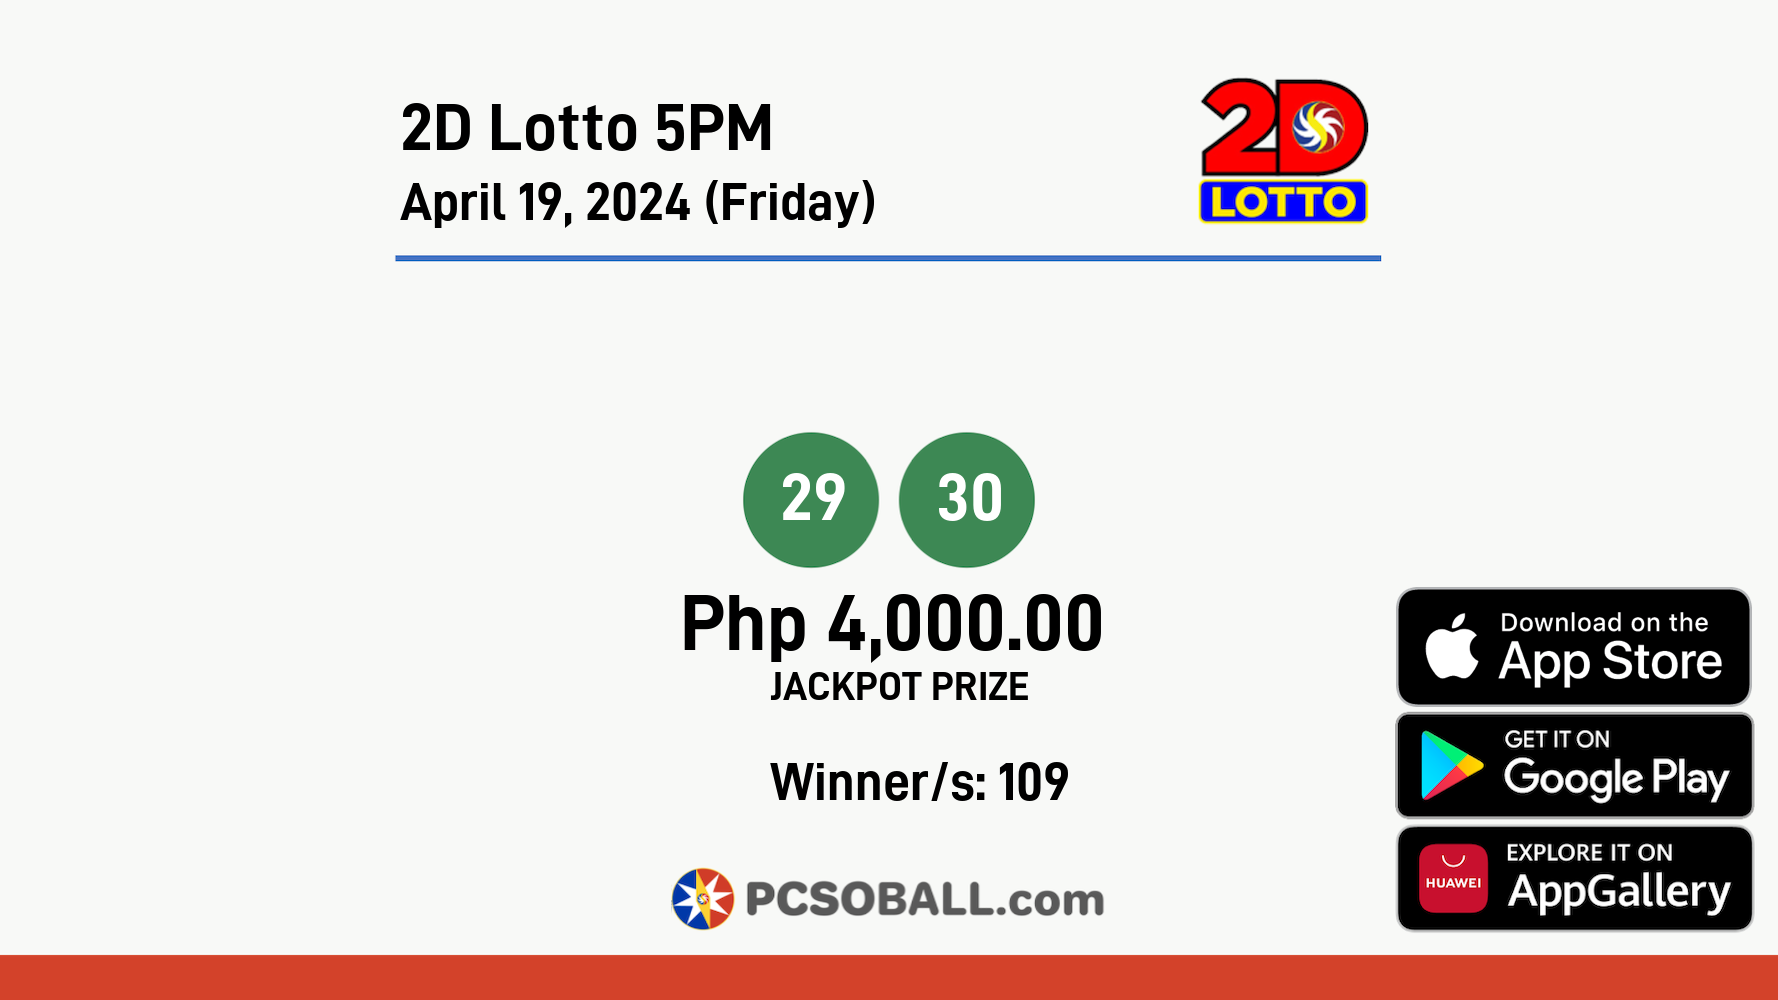 2D Lotto 5PM April 19, 2024 (Friday) Result